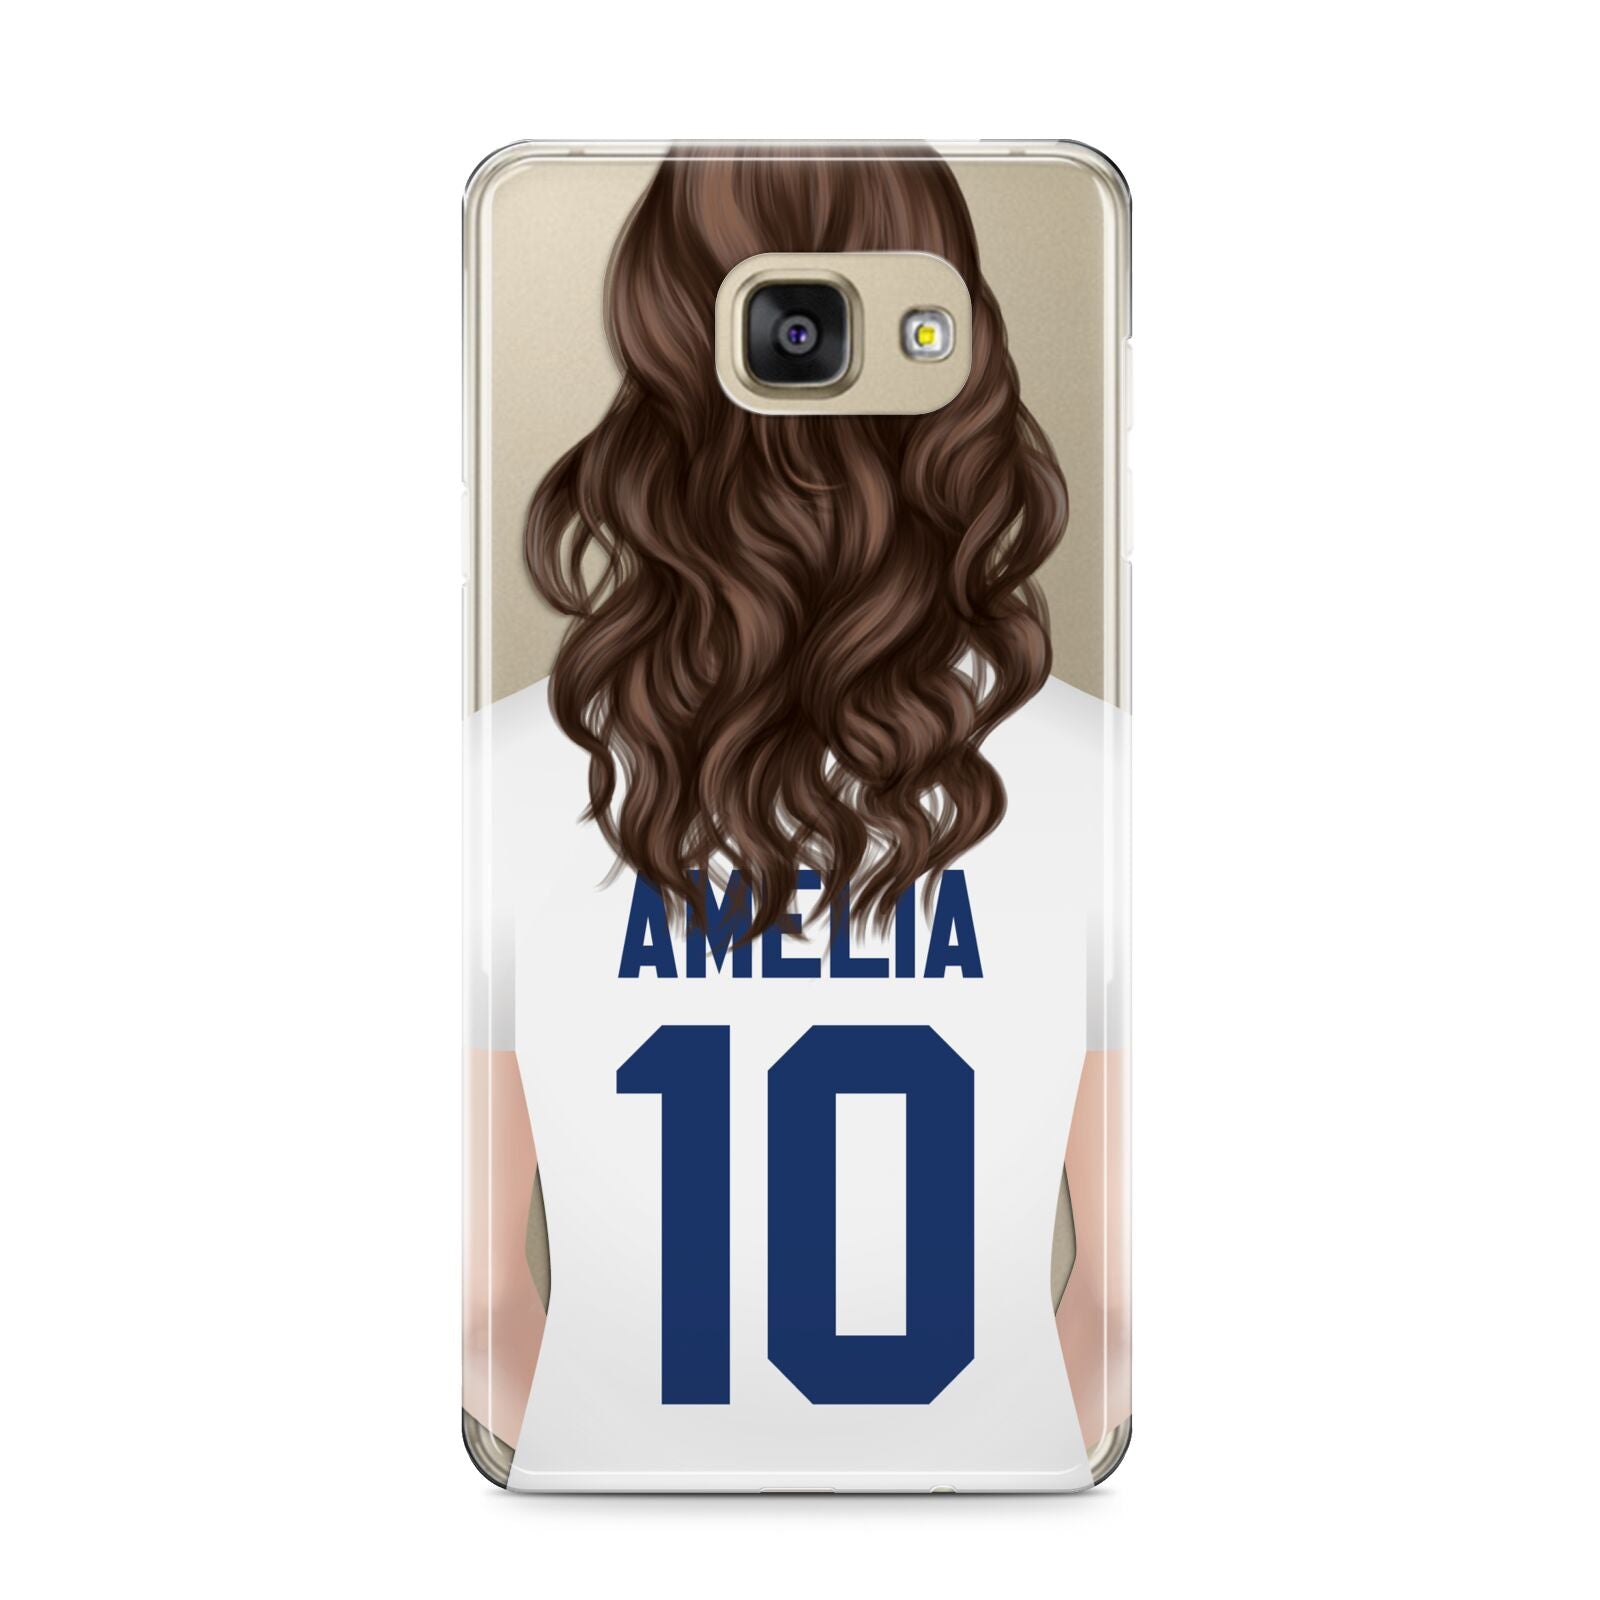 Womens Footballer Personalised Samsung Galaxy A9 2016 Case on gold phone